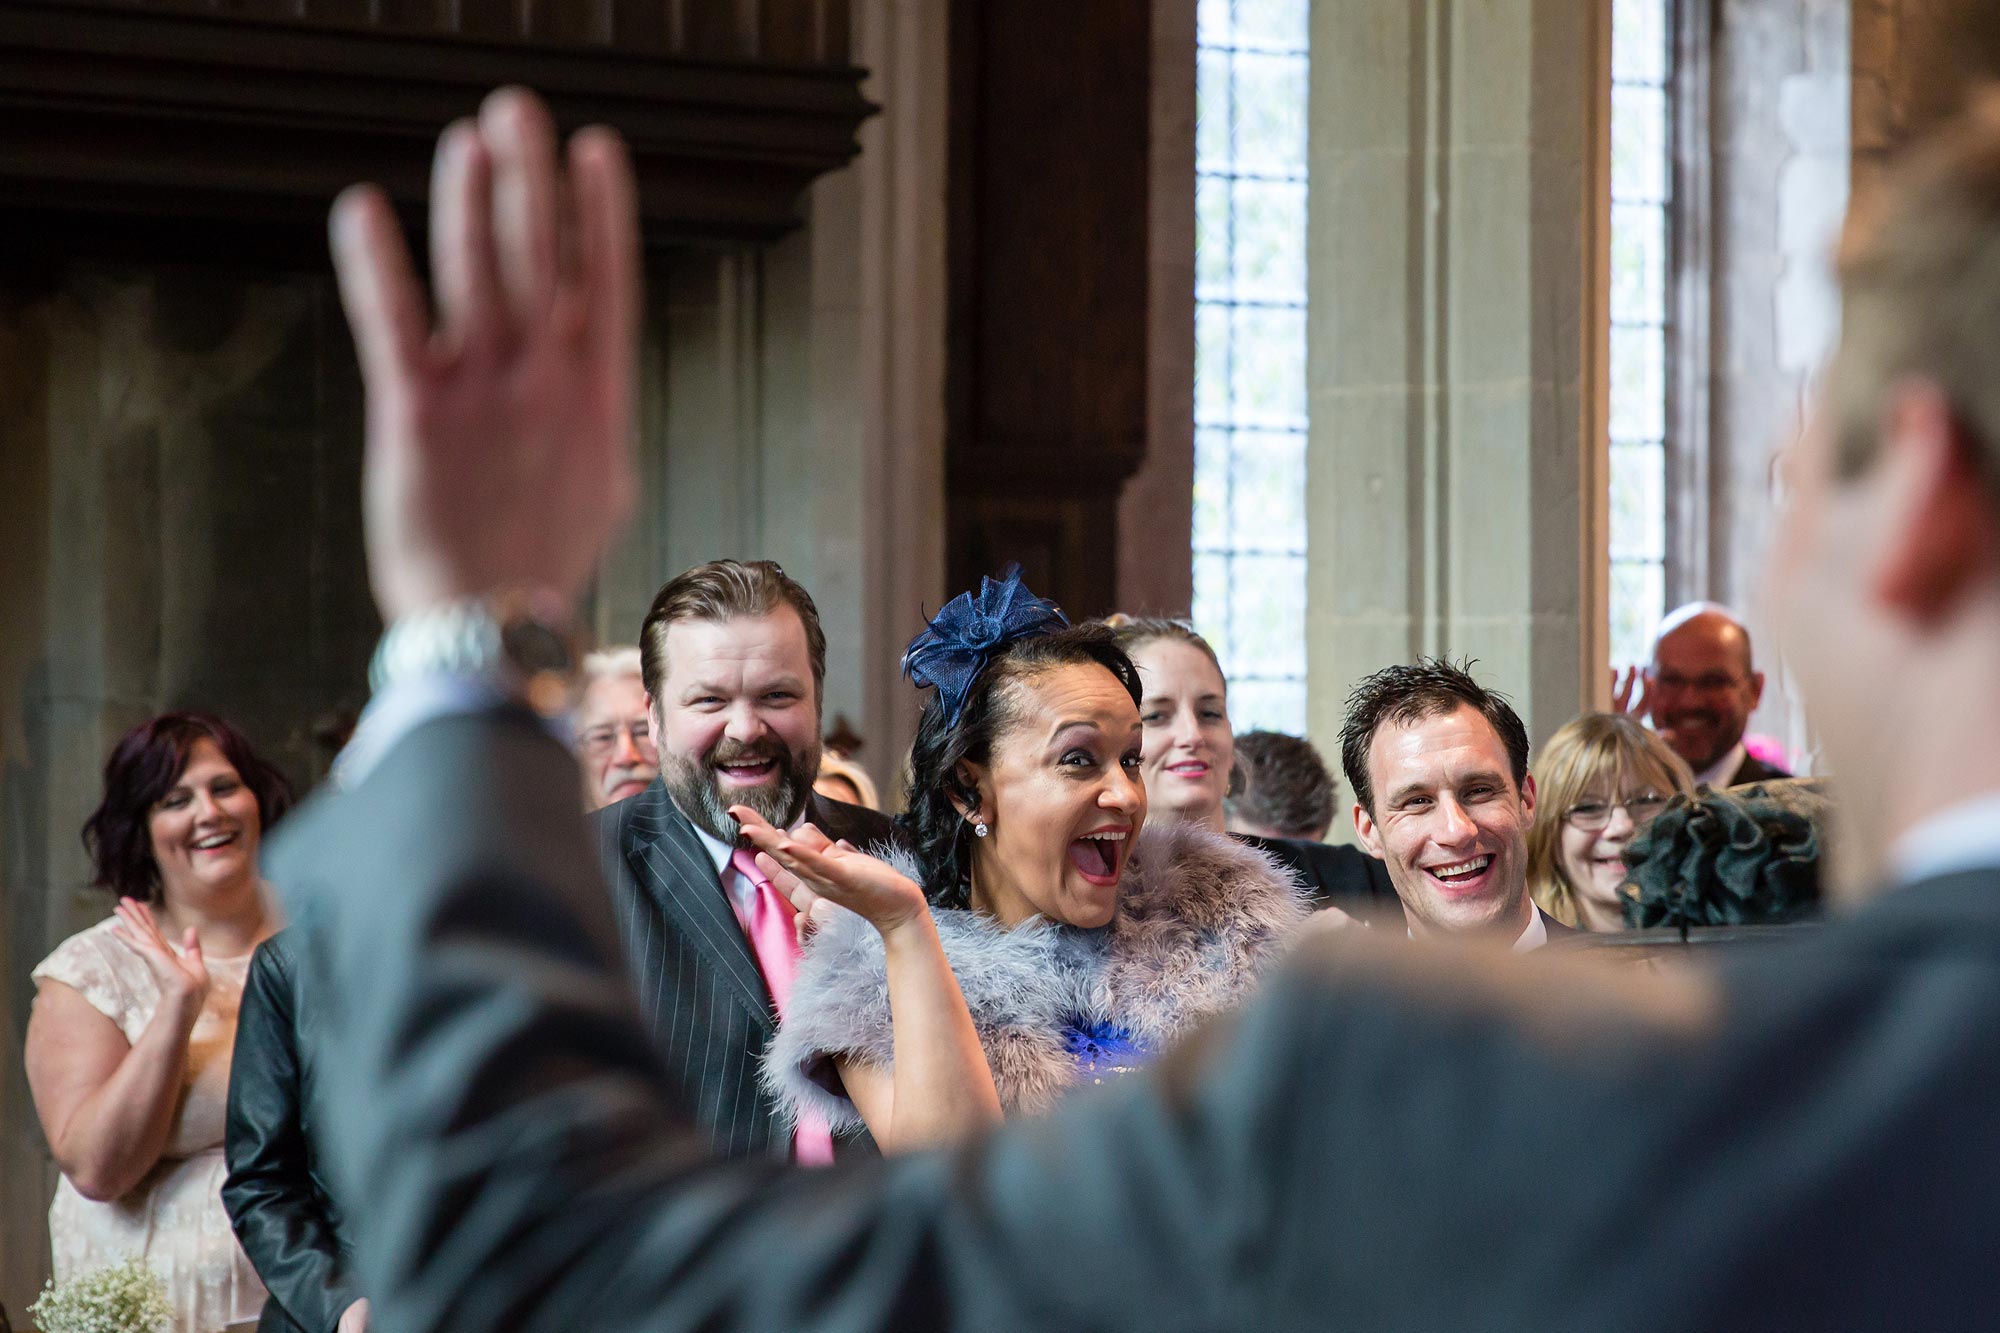 Guests wave during the Hengrave Hall wedding